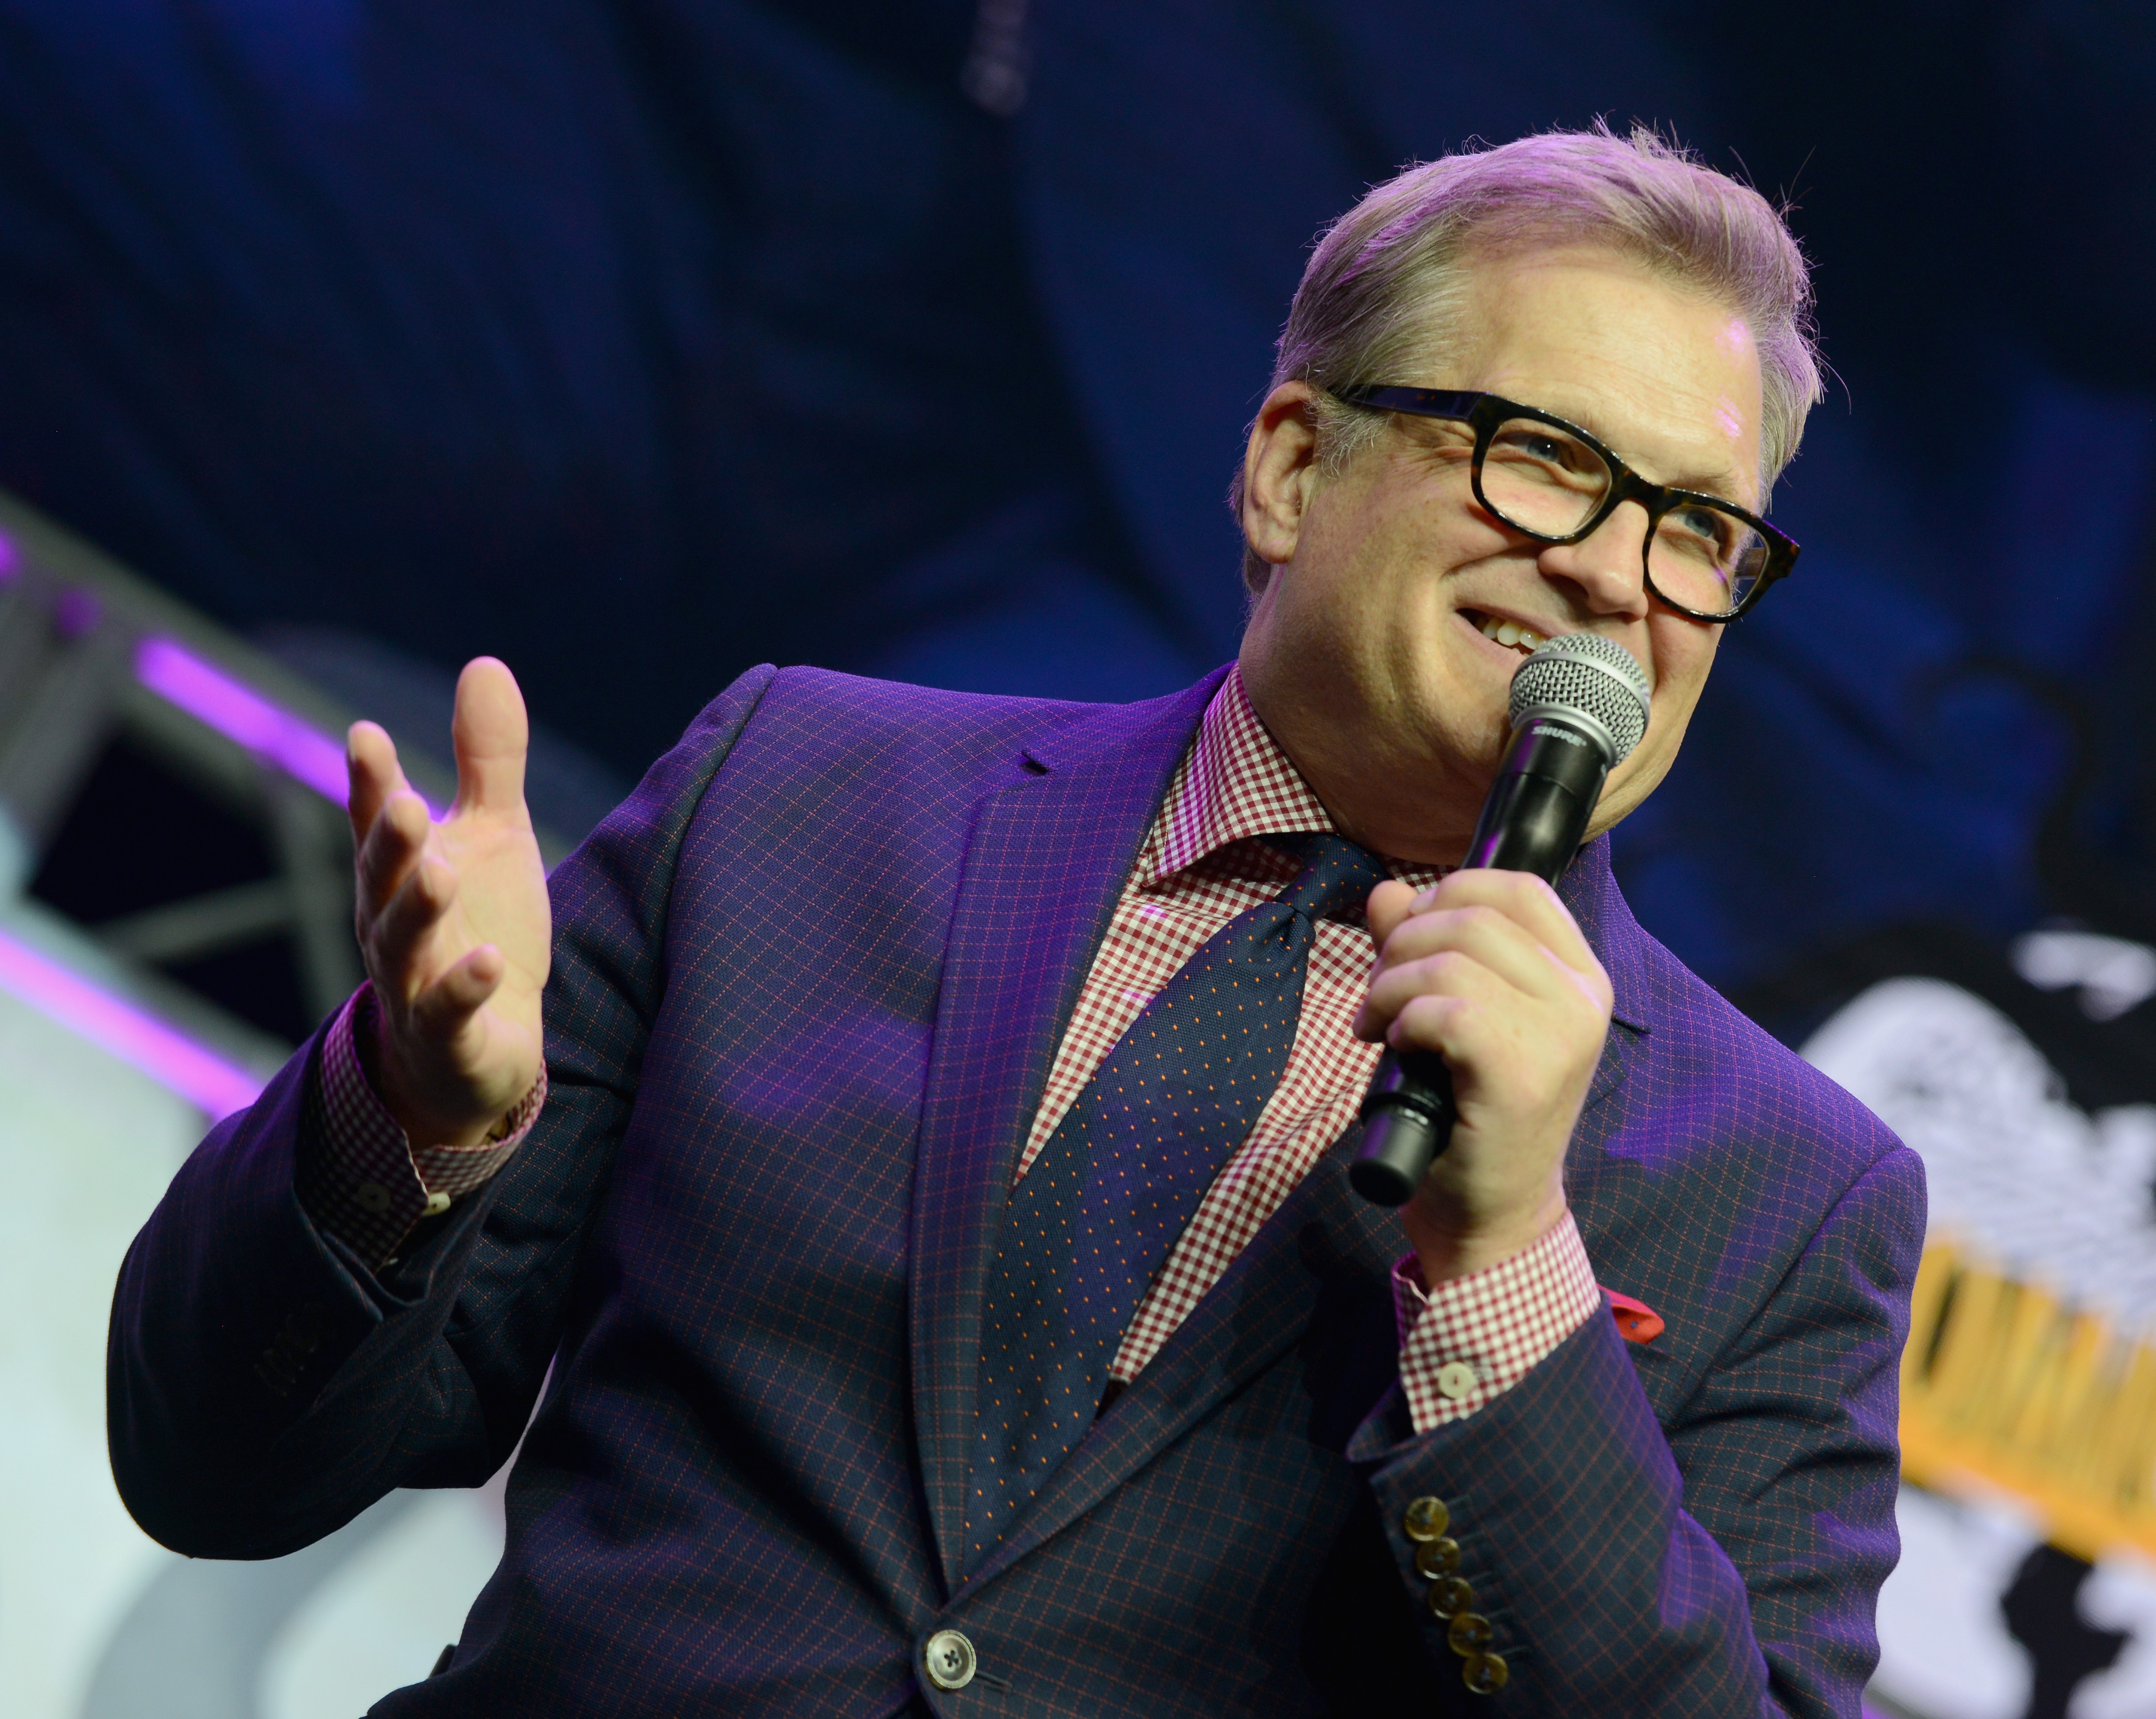 Drew Carey's Weight Loss: The Price Is Right Host Shed Nearly 100 Pounds